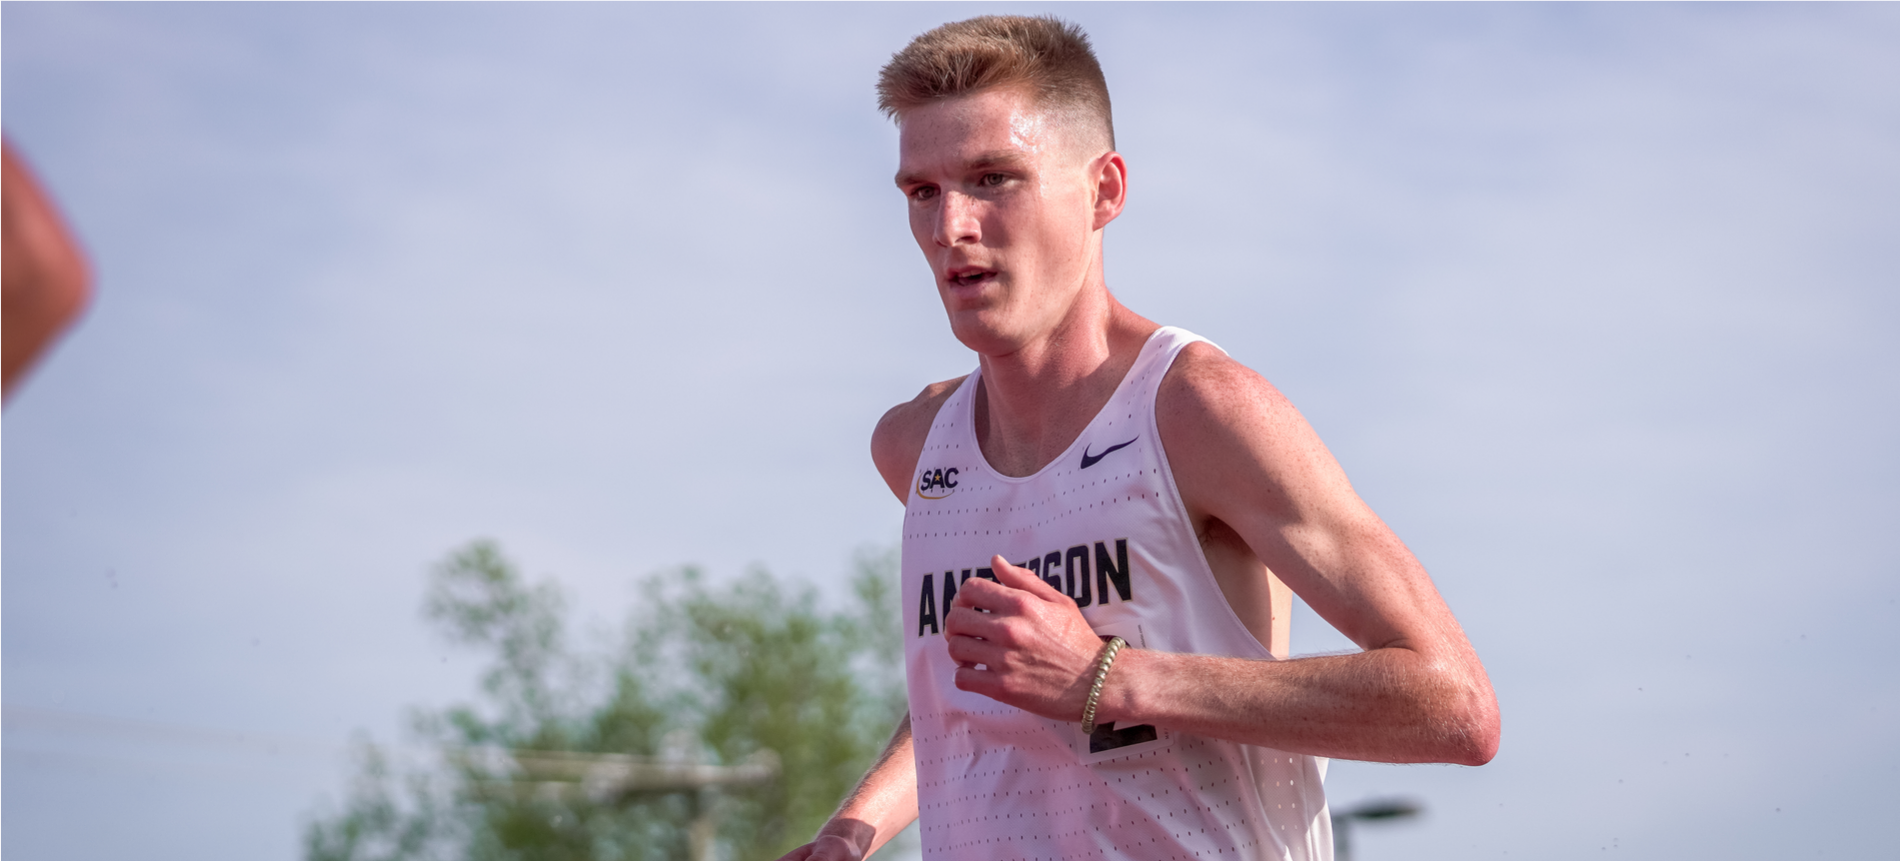 Quillen Sets 3,000m SC Anderson School Record at Lee Last Chance Meet